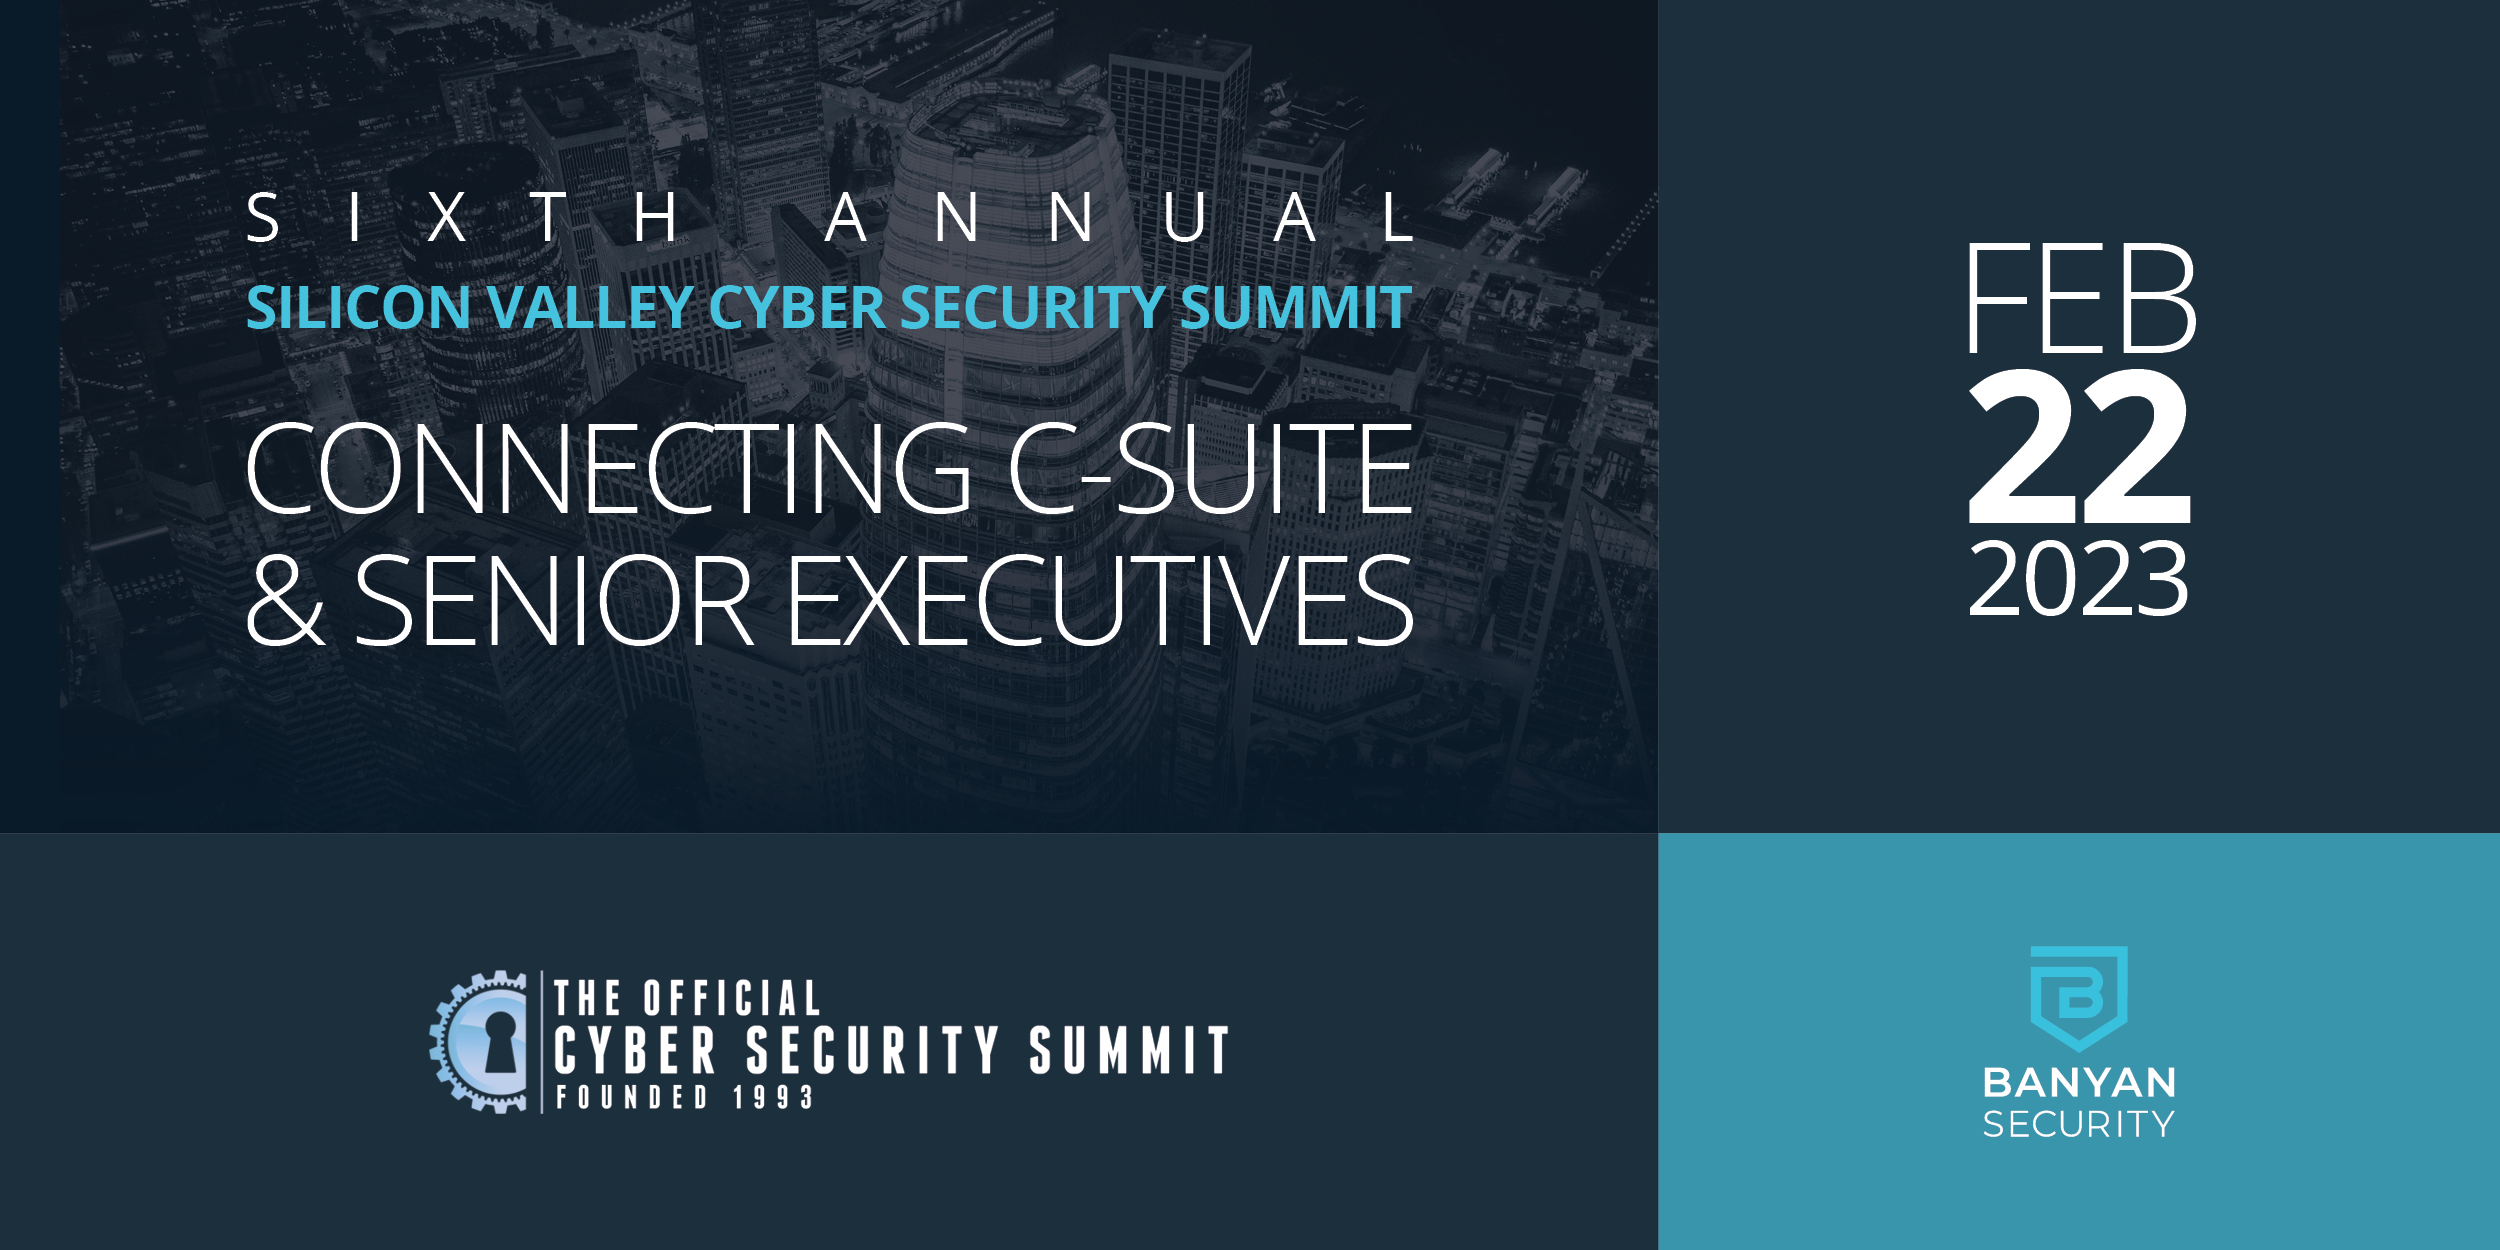 Cyber Security Summit - Silicon Valley